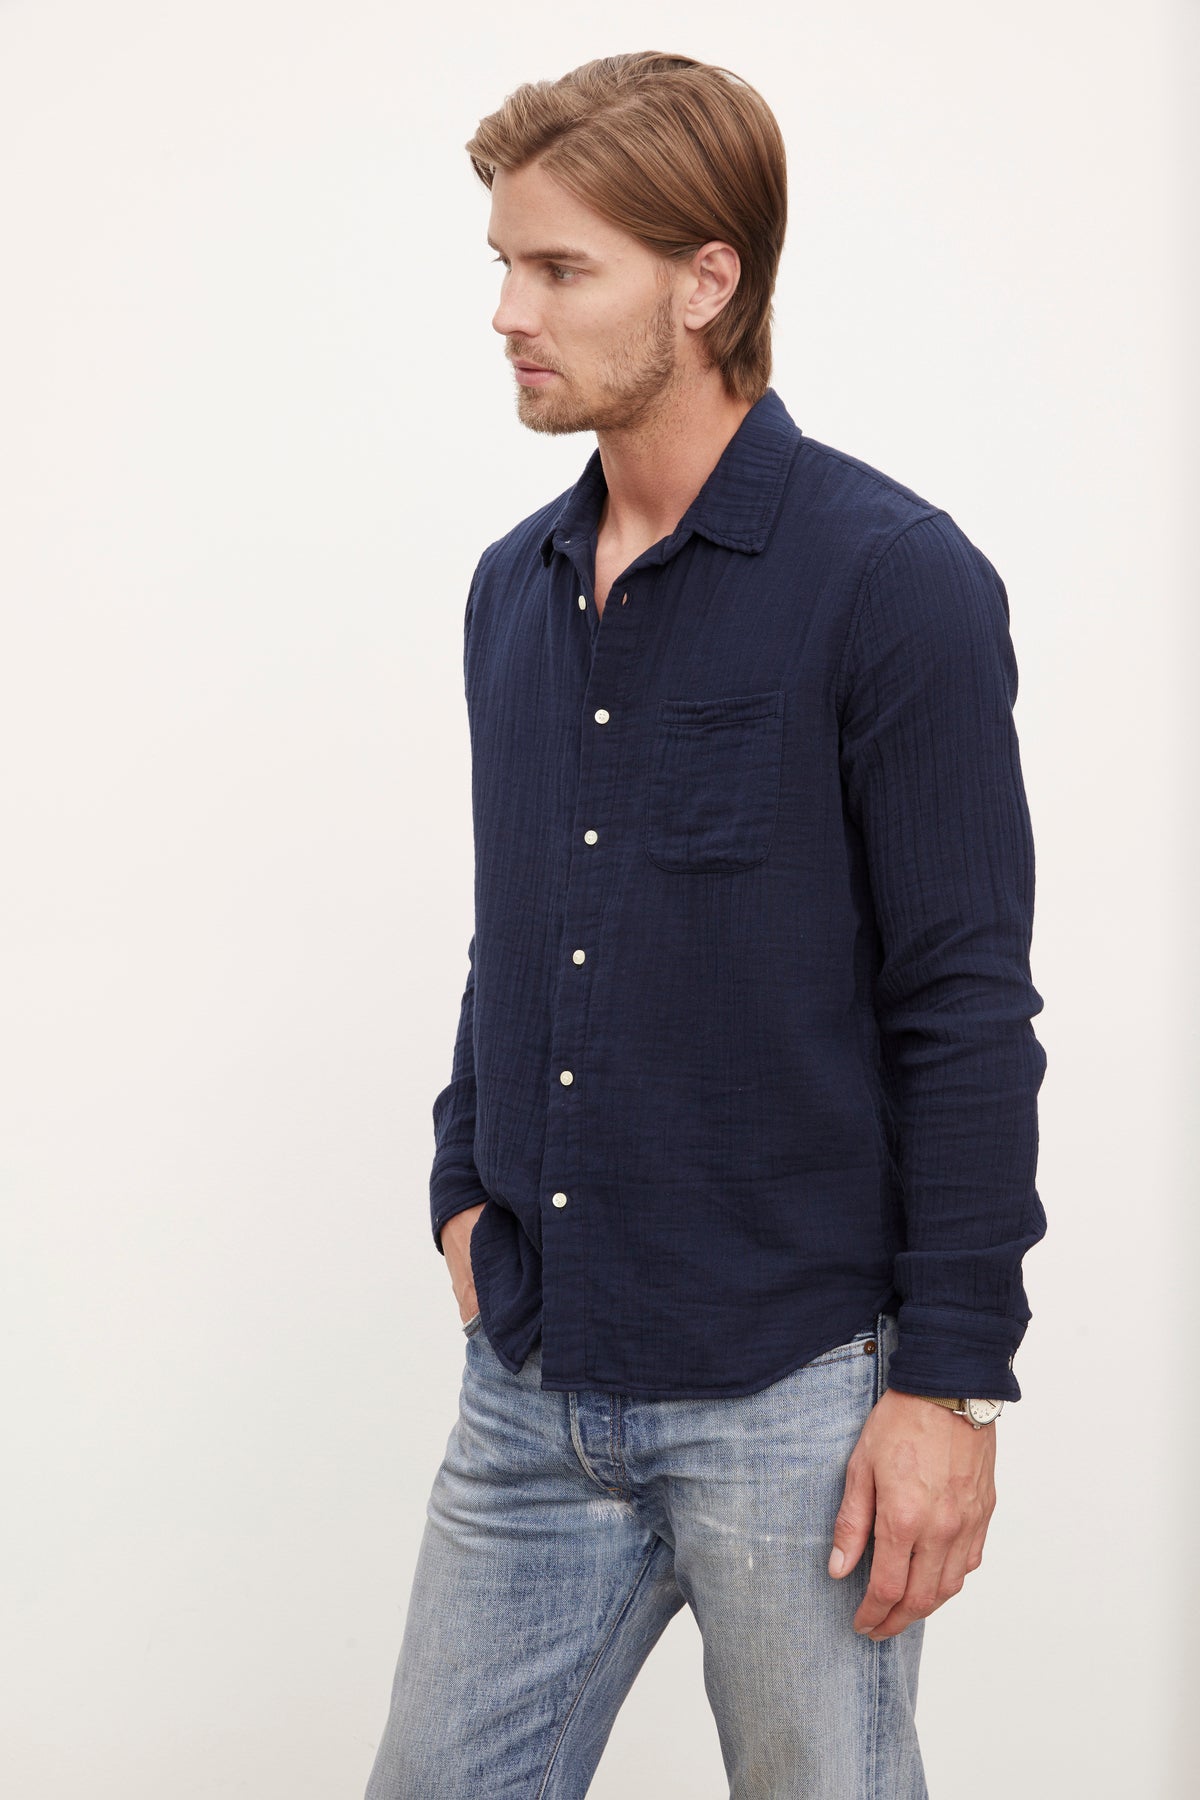   A casual man wearing jeans and the ELTON BUTTON-UP SHIRT by Velvet by Graham & Spencer. 